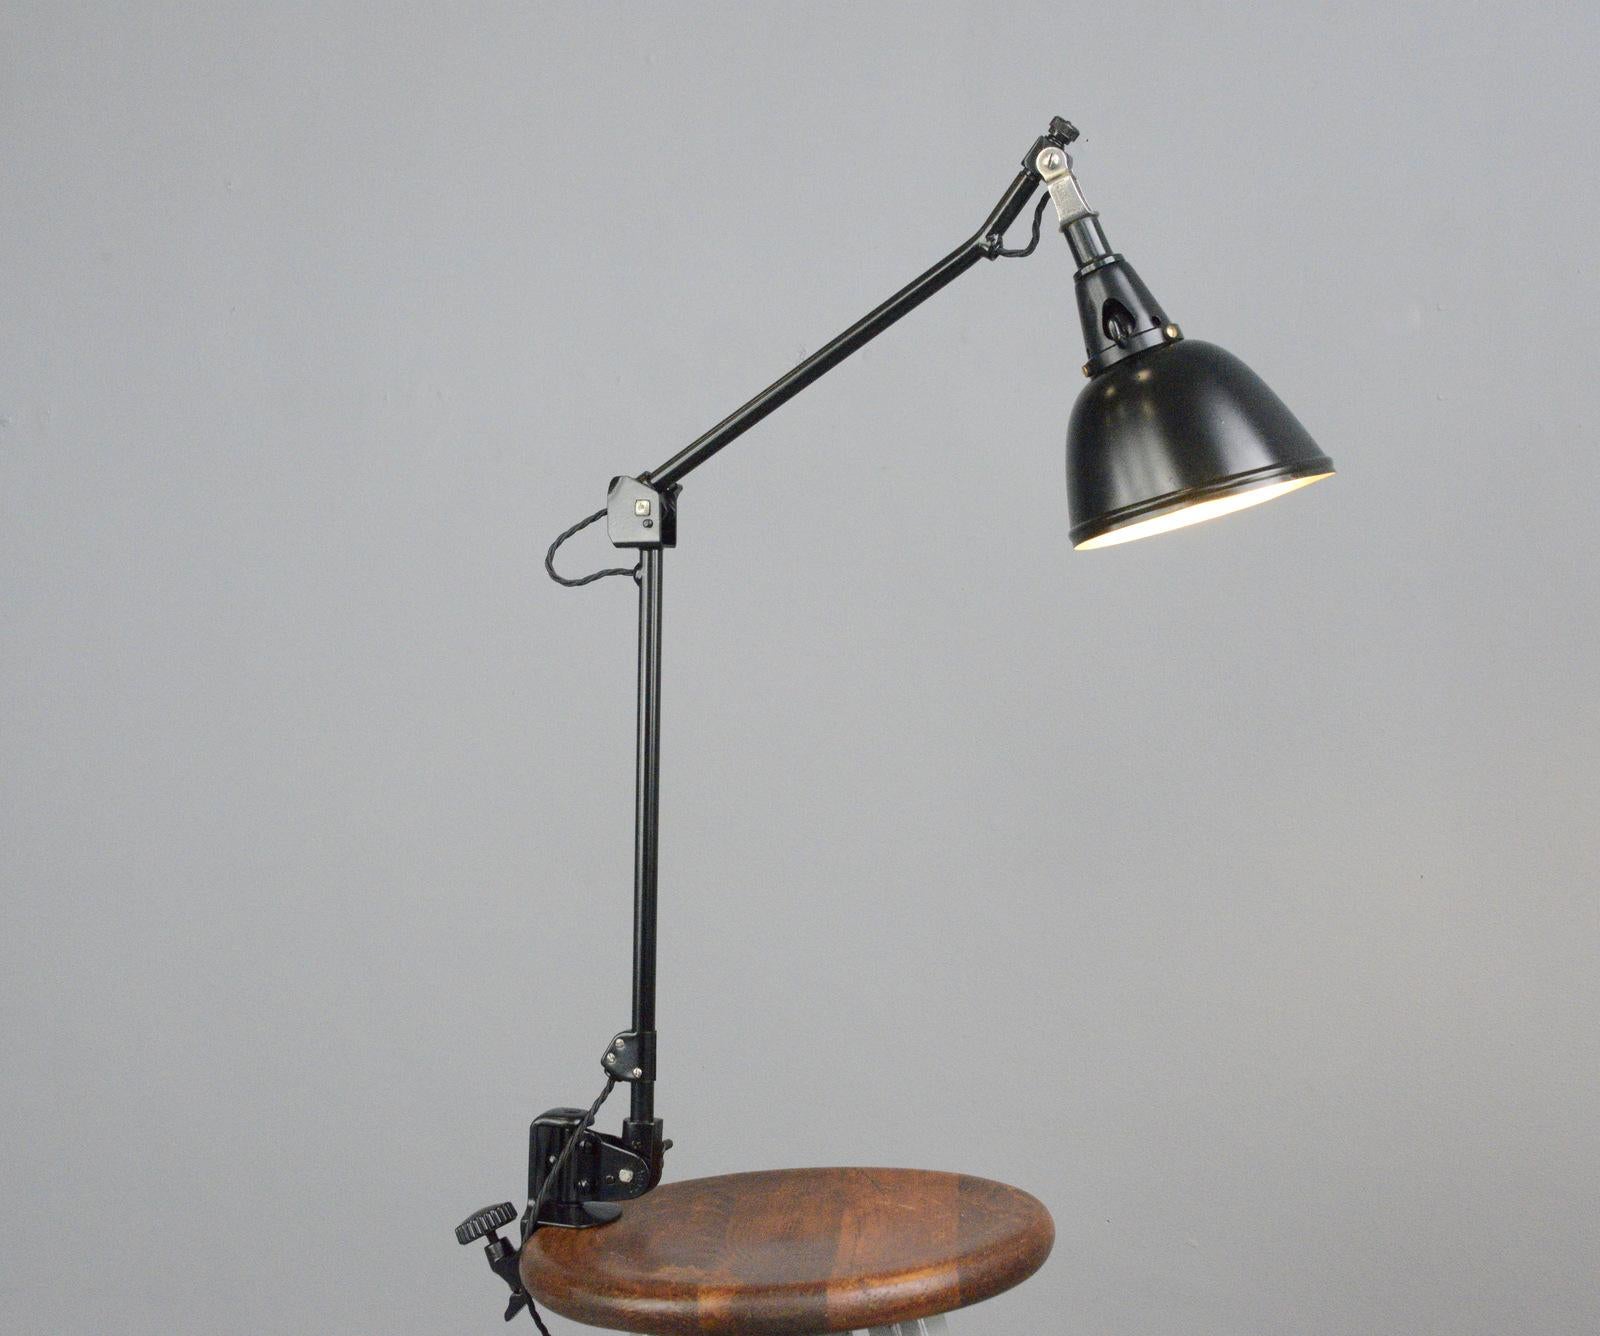 Midgard Typ 114 table lamp by Curt Fischer, circa 1930s

- Fully articulated
- Clamp on with original bakelite knob
- Aluminium shade
- Takes E27 fitting bulbs
- On/Off toggle switch on the head of the lamp
- Designed by Curt Fischer
-